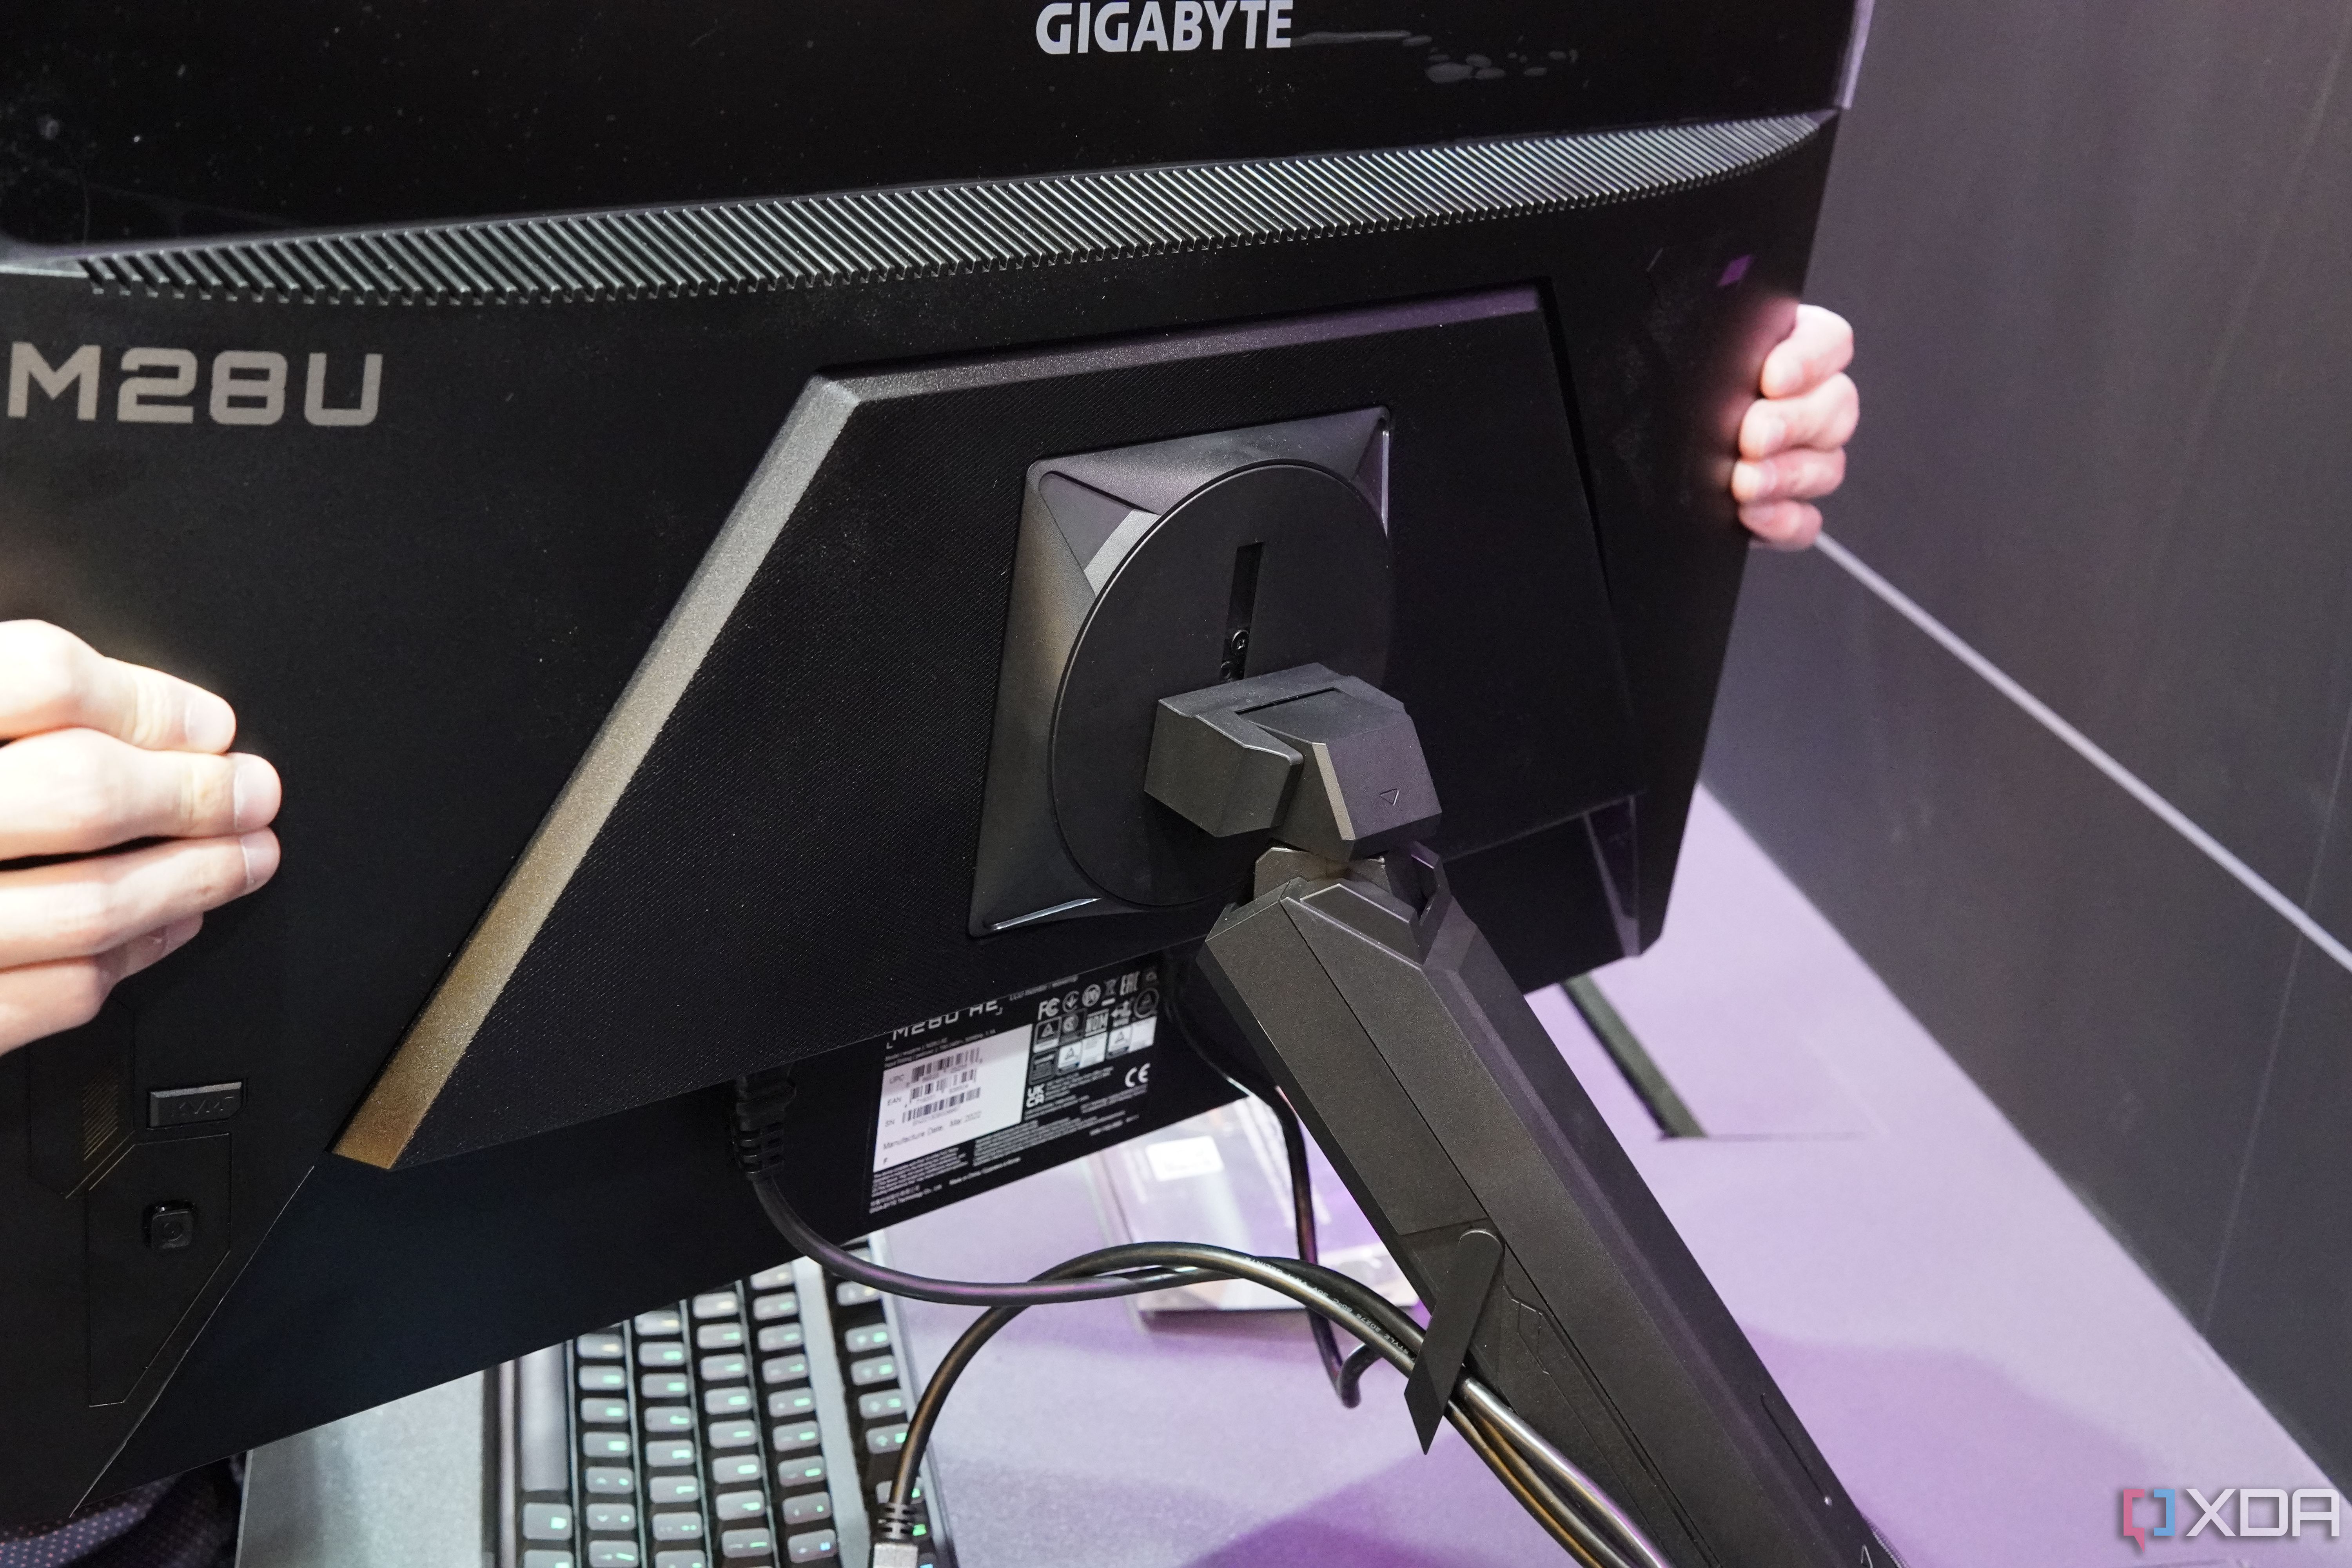 Back view of the Gigabyte M28U Arm Edition showing the mounting arm attached to the monitor